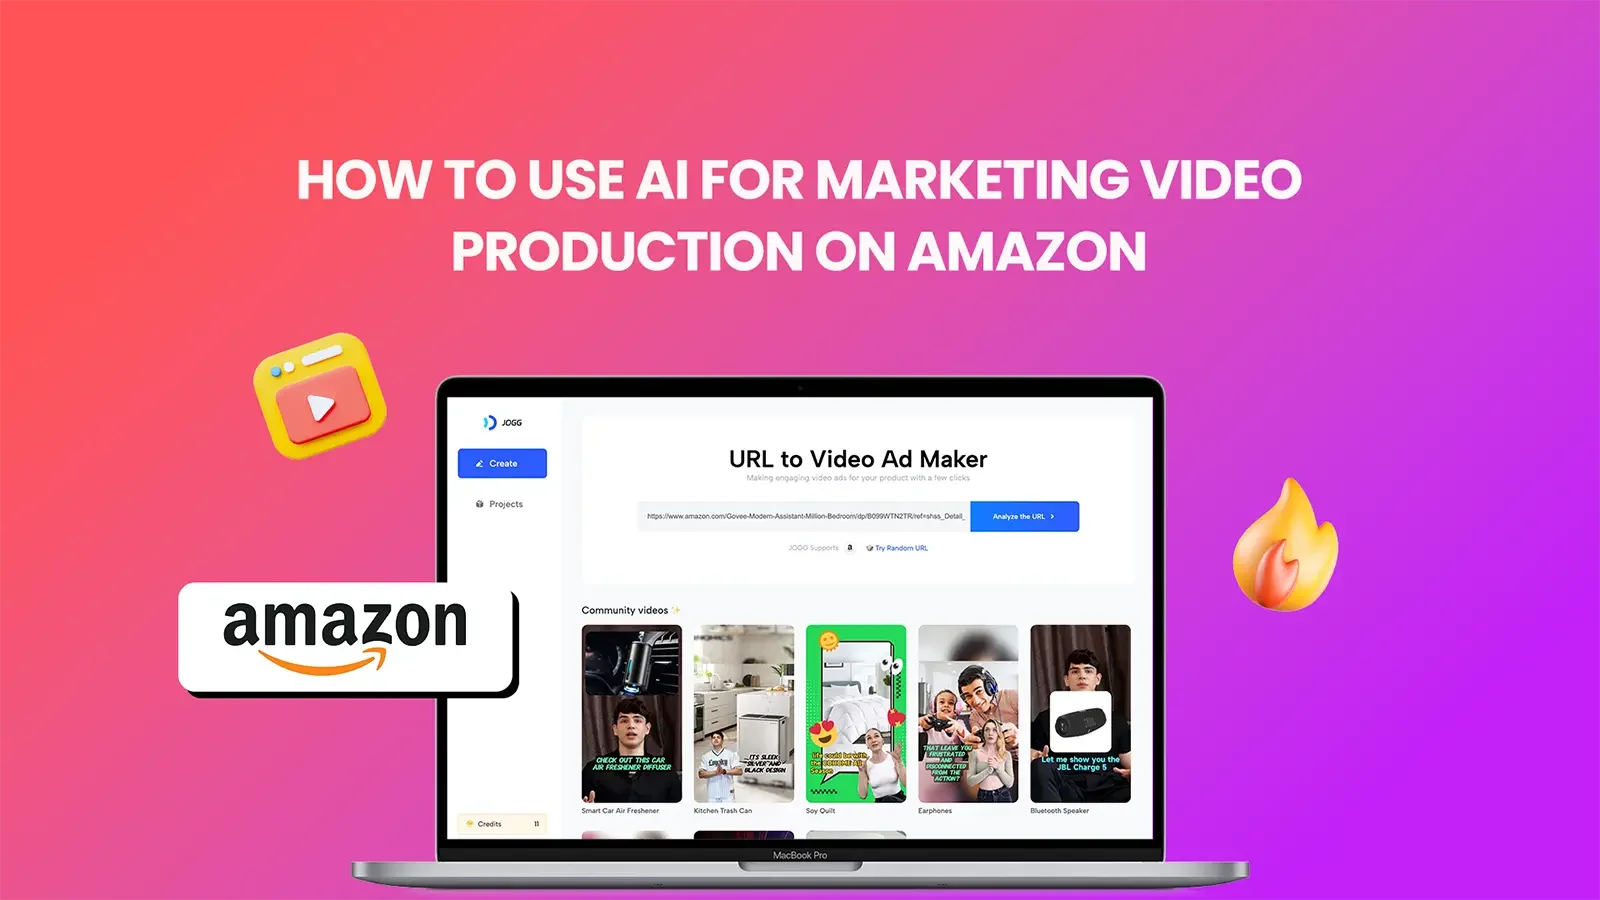 How to Use AI for Marketing Video Production on Amazon